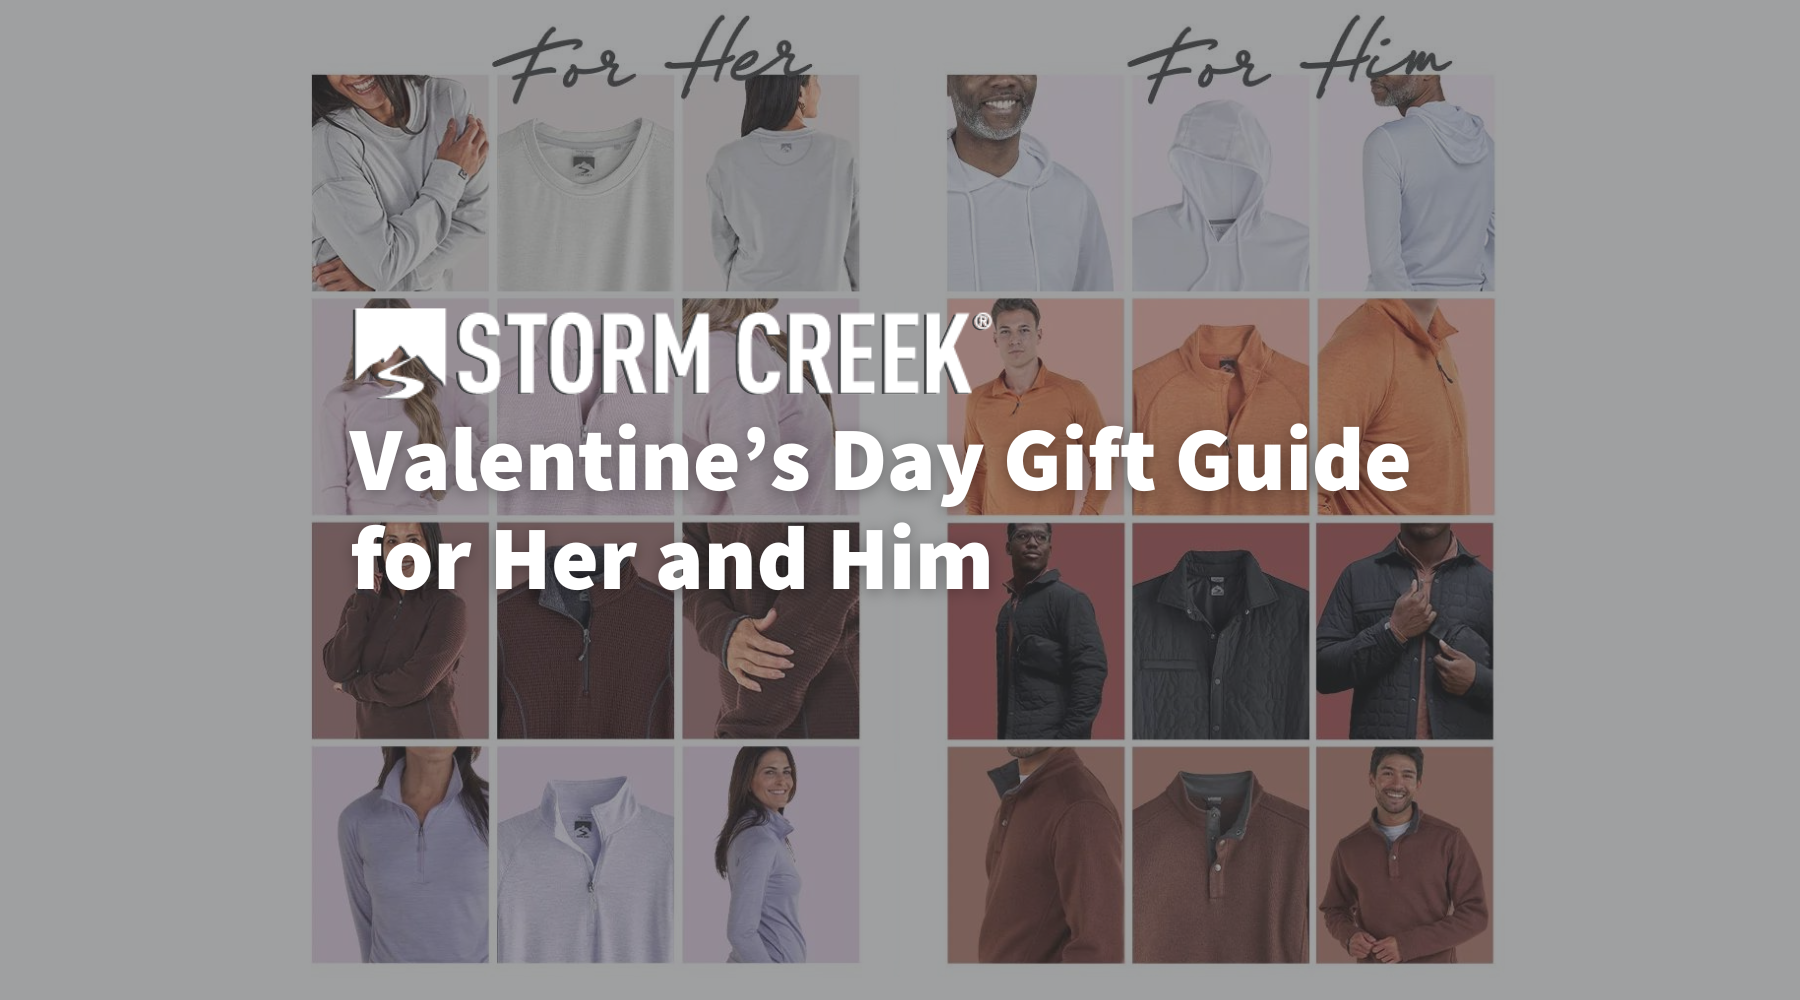 Storm Creek Valentine’s Day Gift Guide for Her and Him